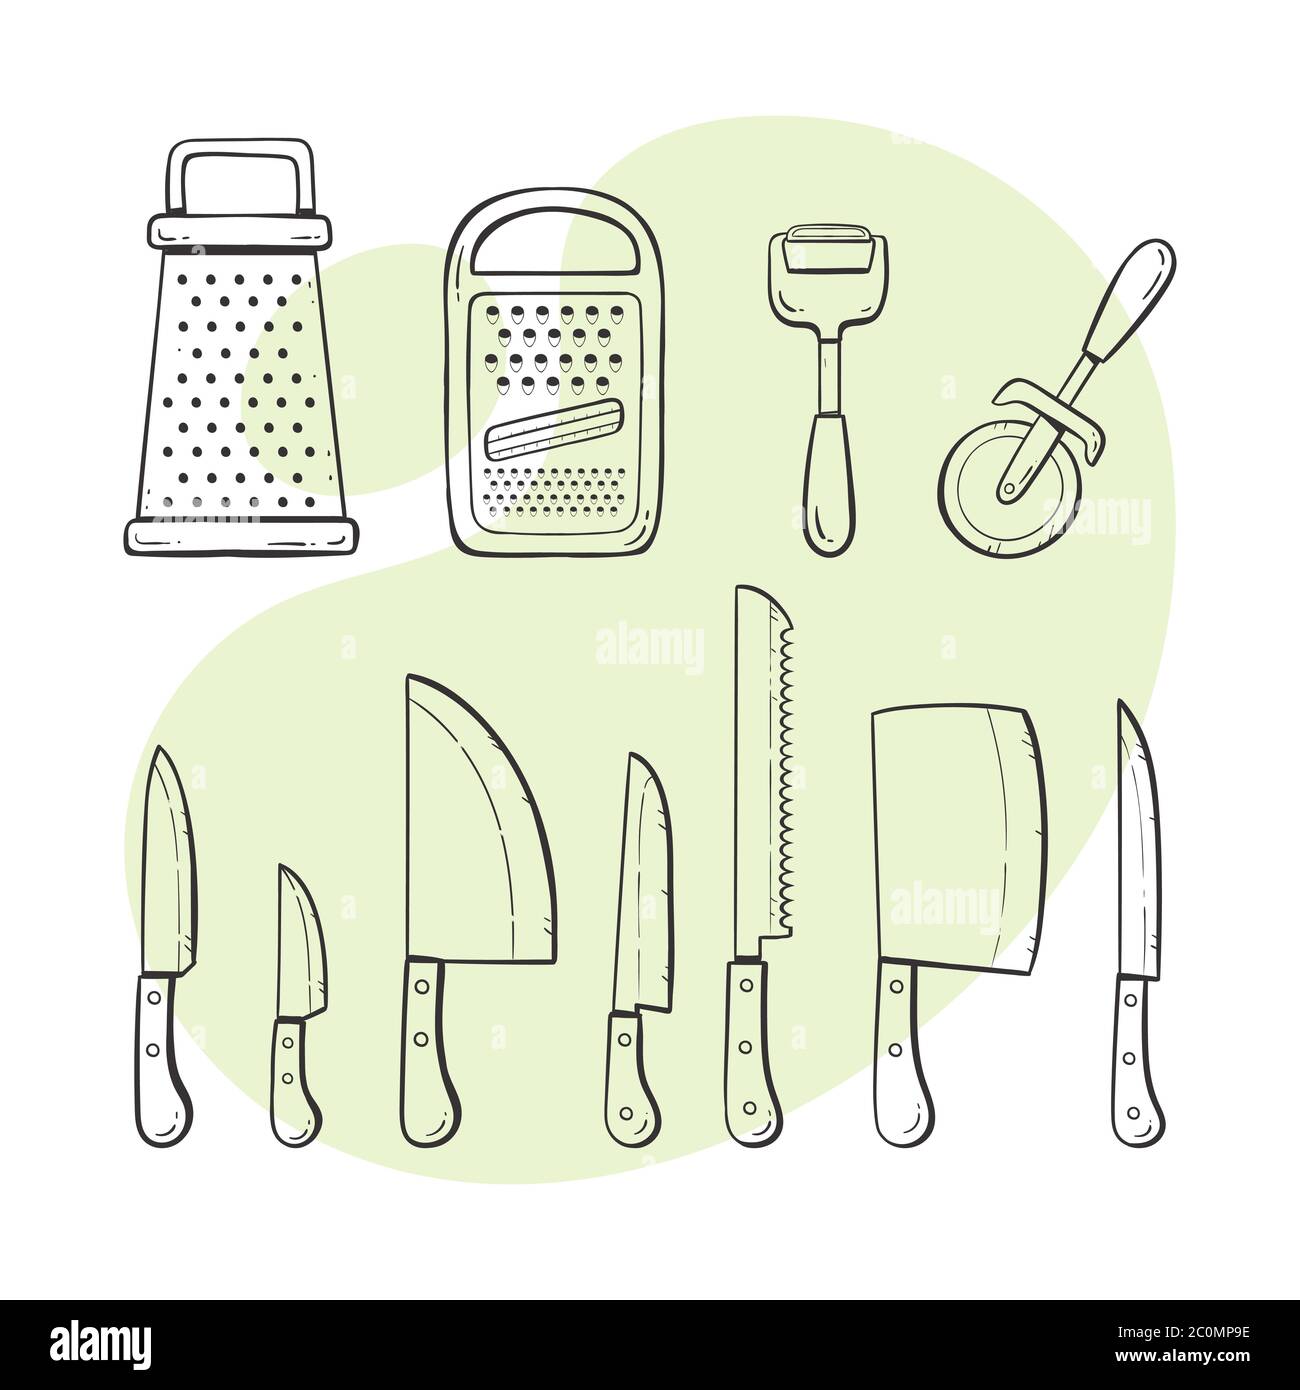 https://c8.alamy.com/comp/2C0MP9E/cooking-tools-collection-of-kitchen-utensils-knives-graters-and-peelers-hand-drawn-outlined-style-collection-2C0MP9E.jpg